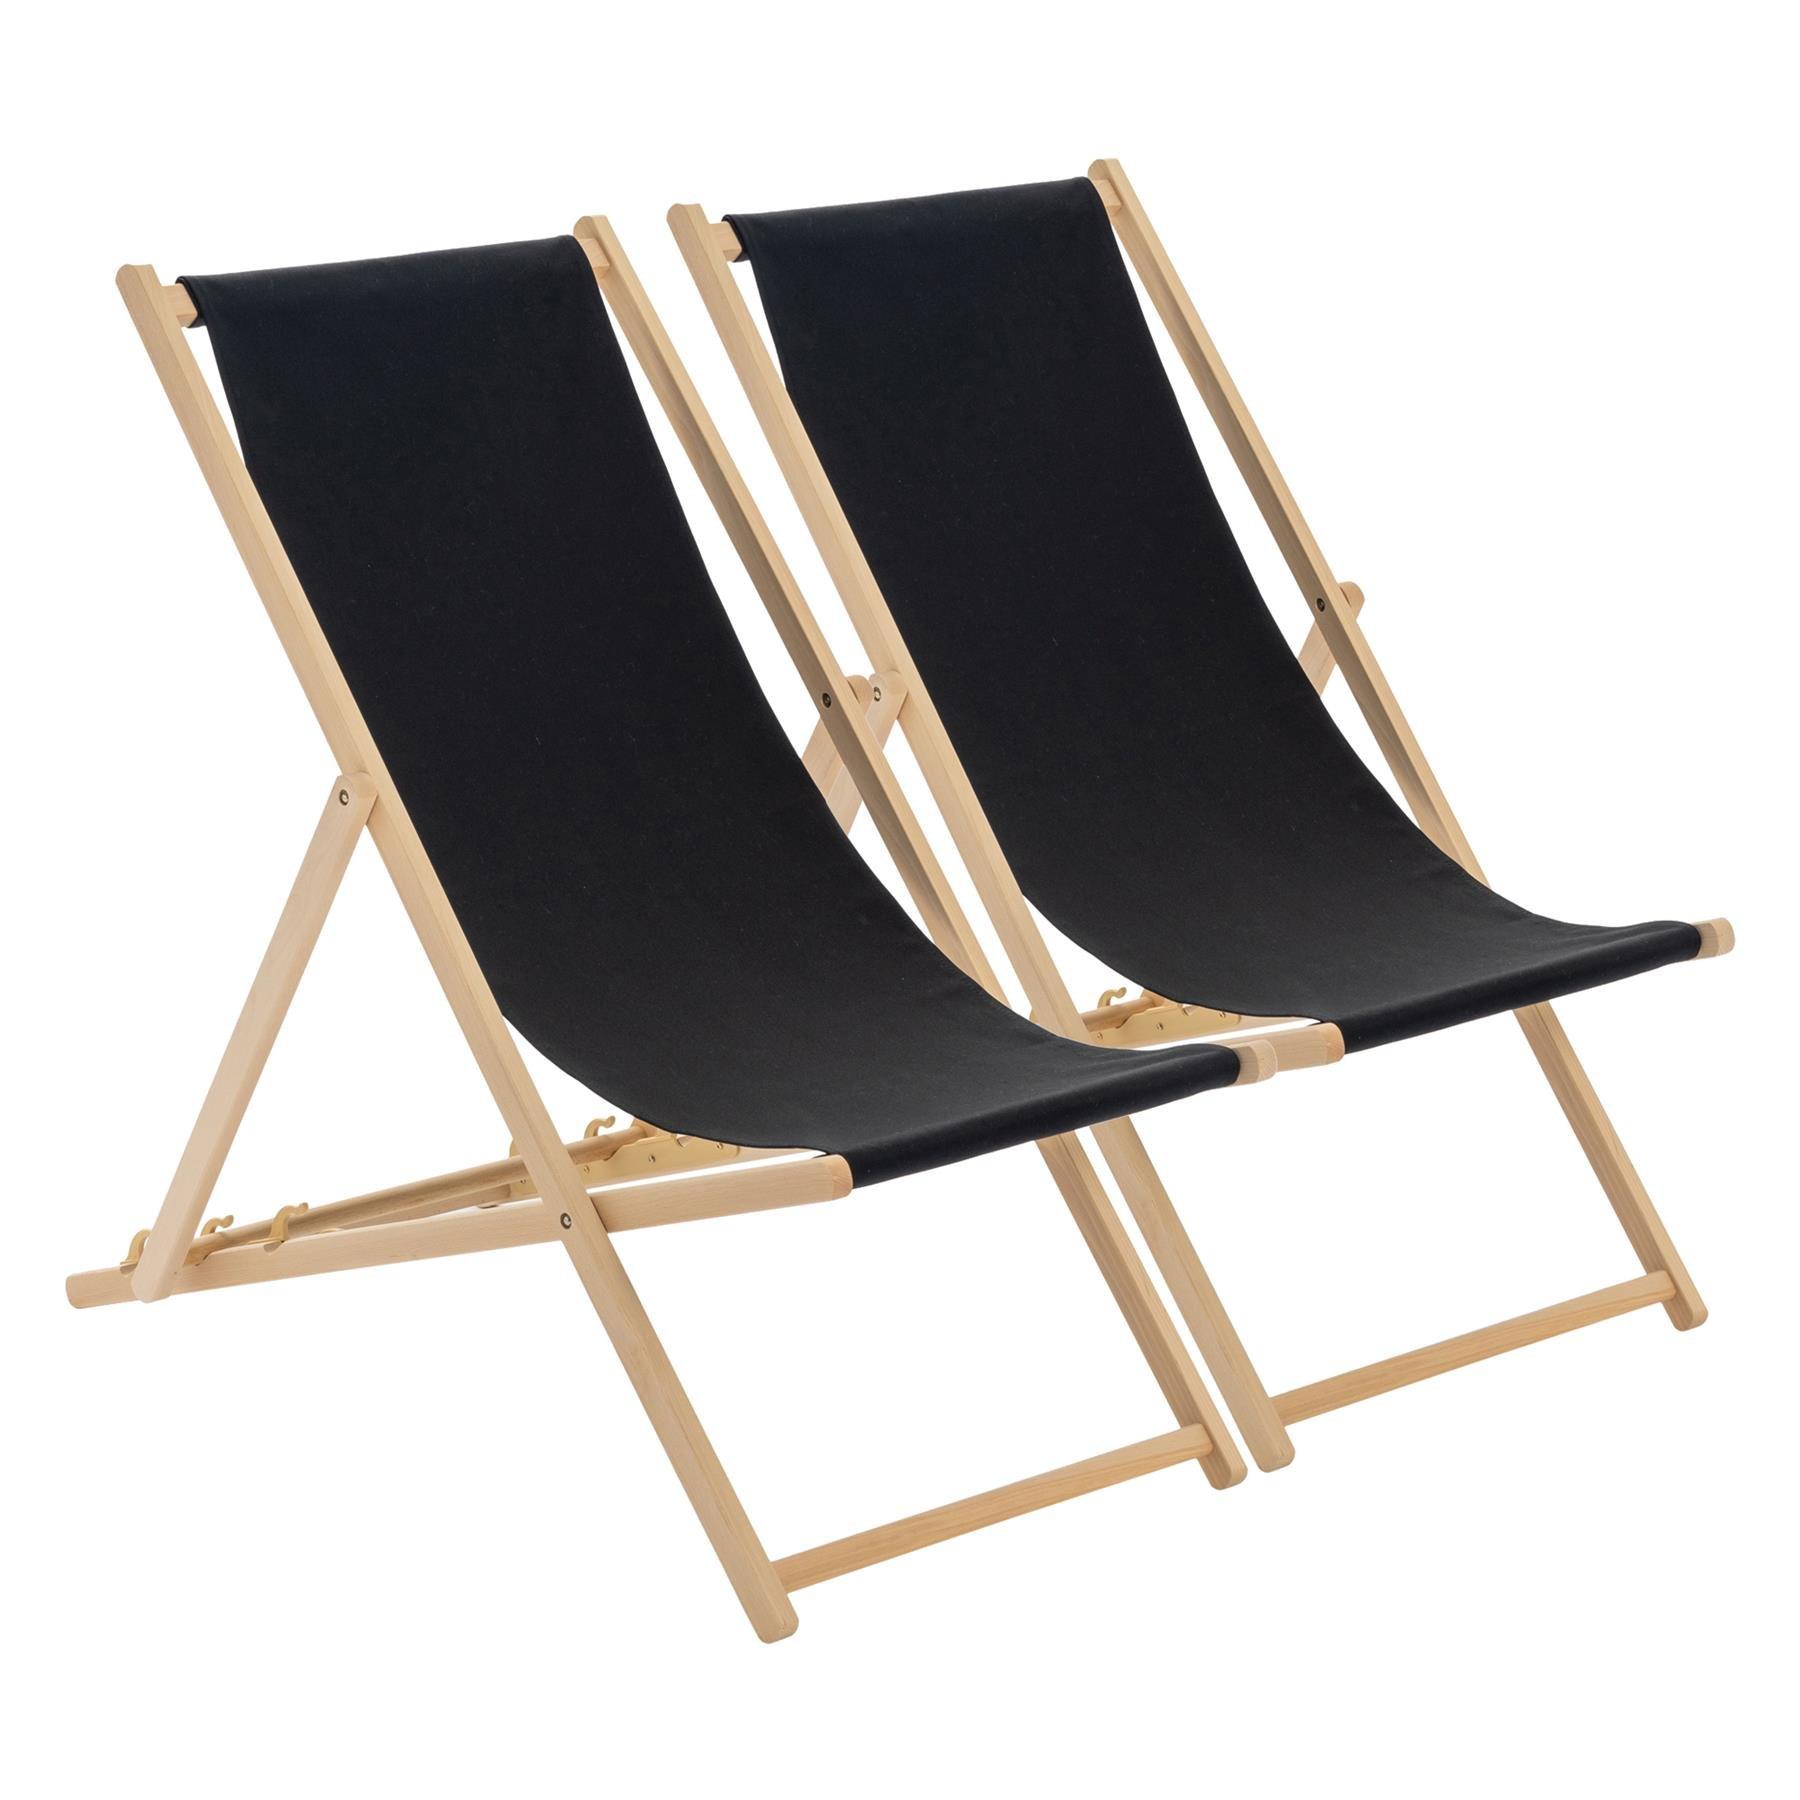 Folding Wooden Deck Chairs Black Pack of 2